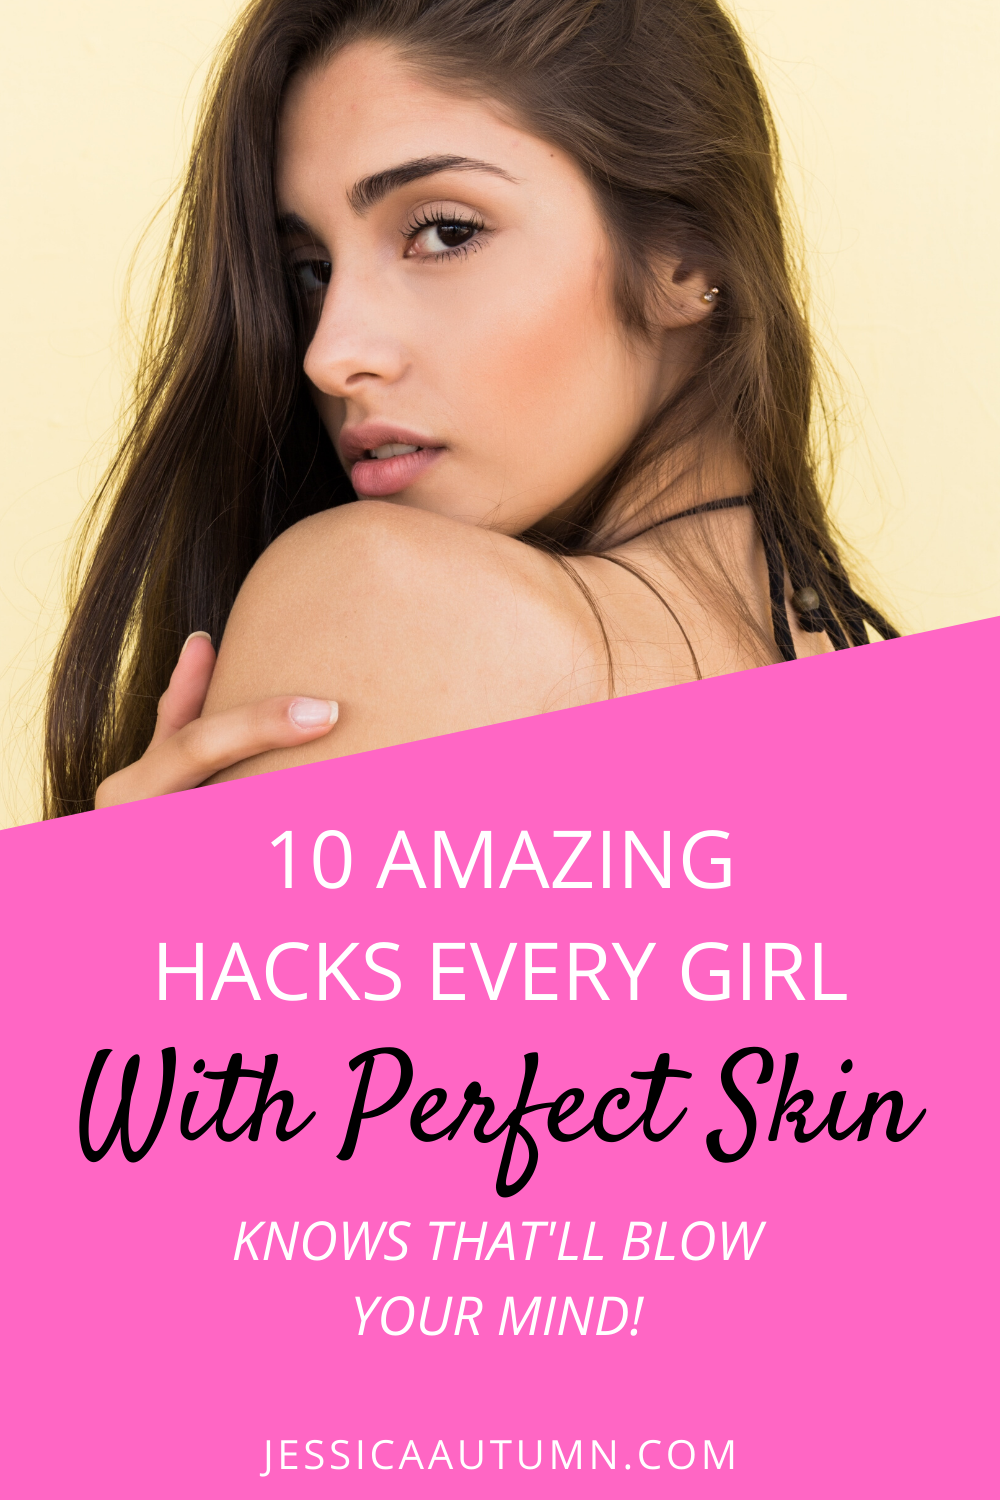 Do you want to know how to get rid of acne and dark marks fast? These skincare tips for breakouts are so helpful! Using apple cider vinegar in your daily skincare routine is just one of the treatments and ways to stop pimples in their tracks!